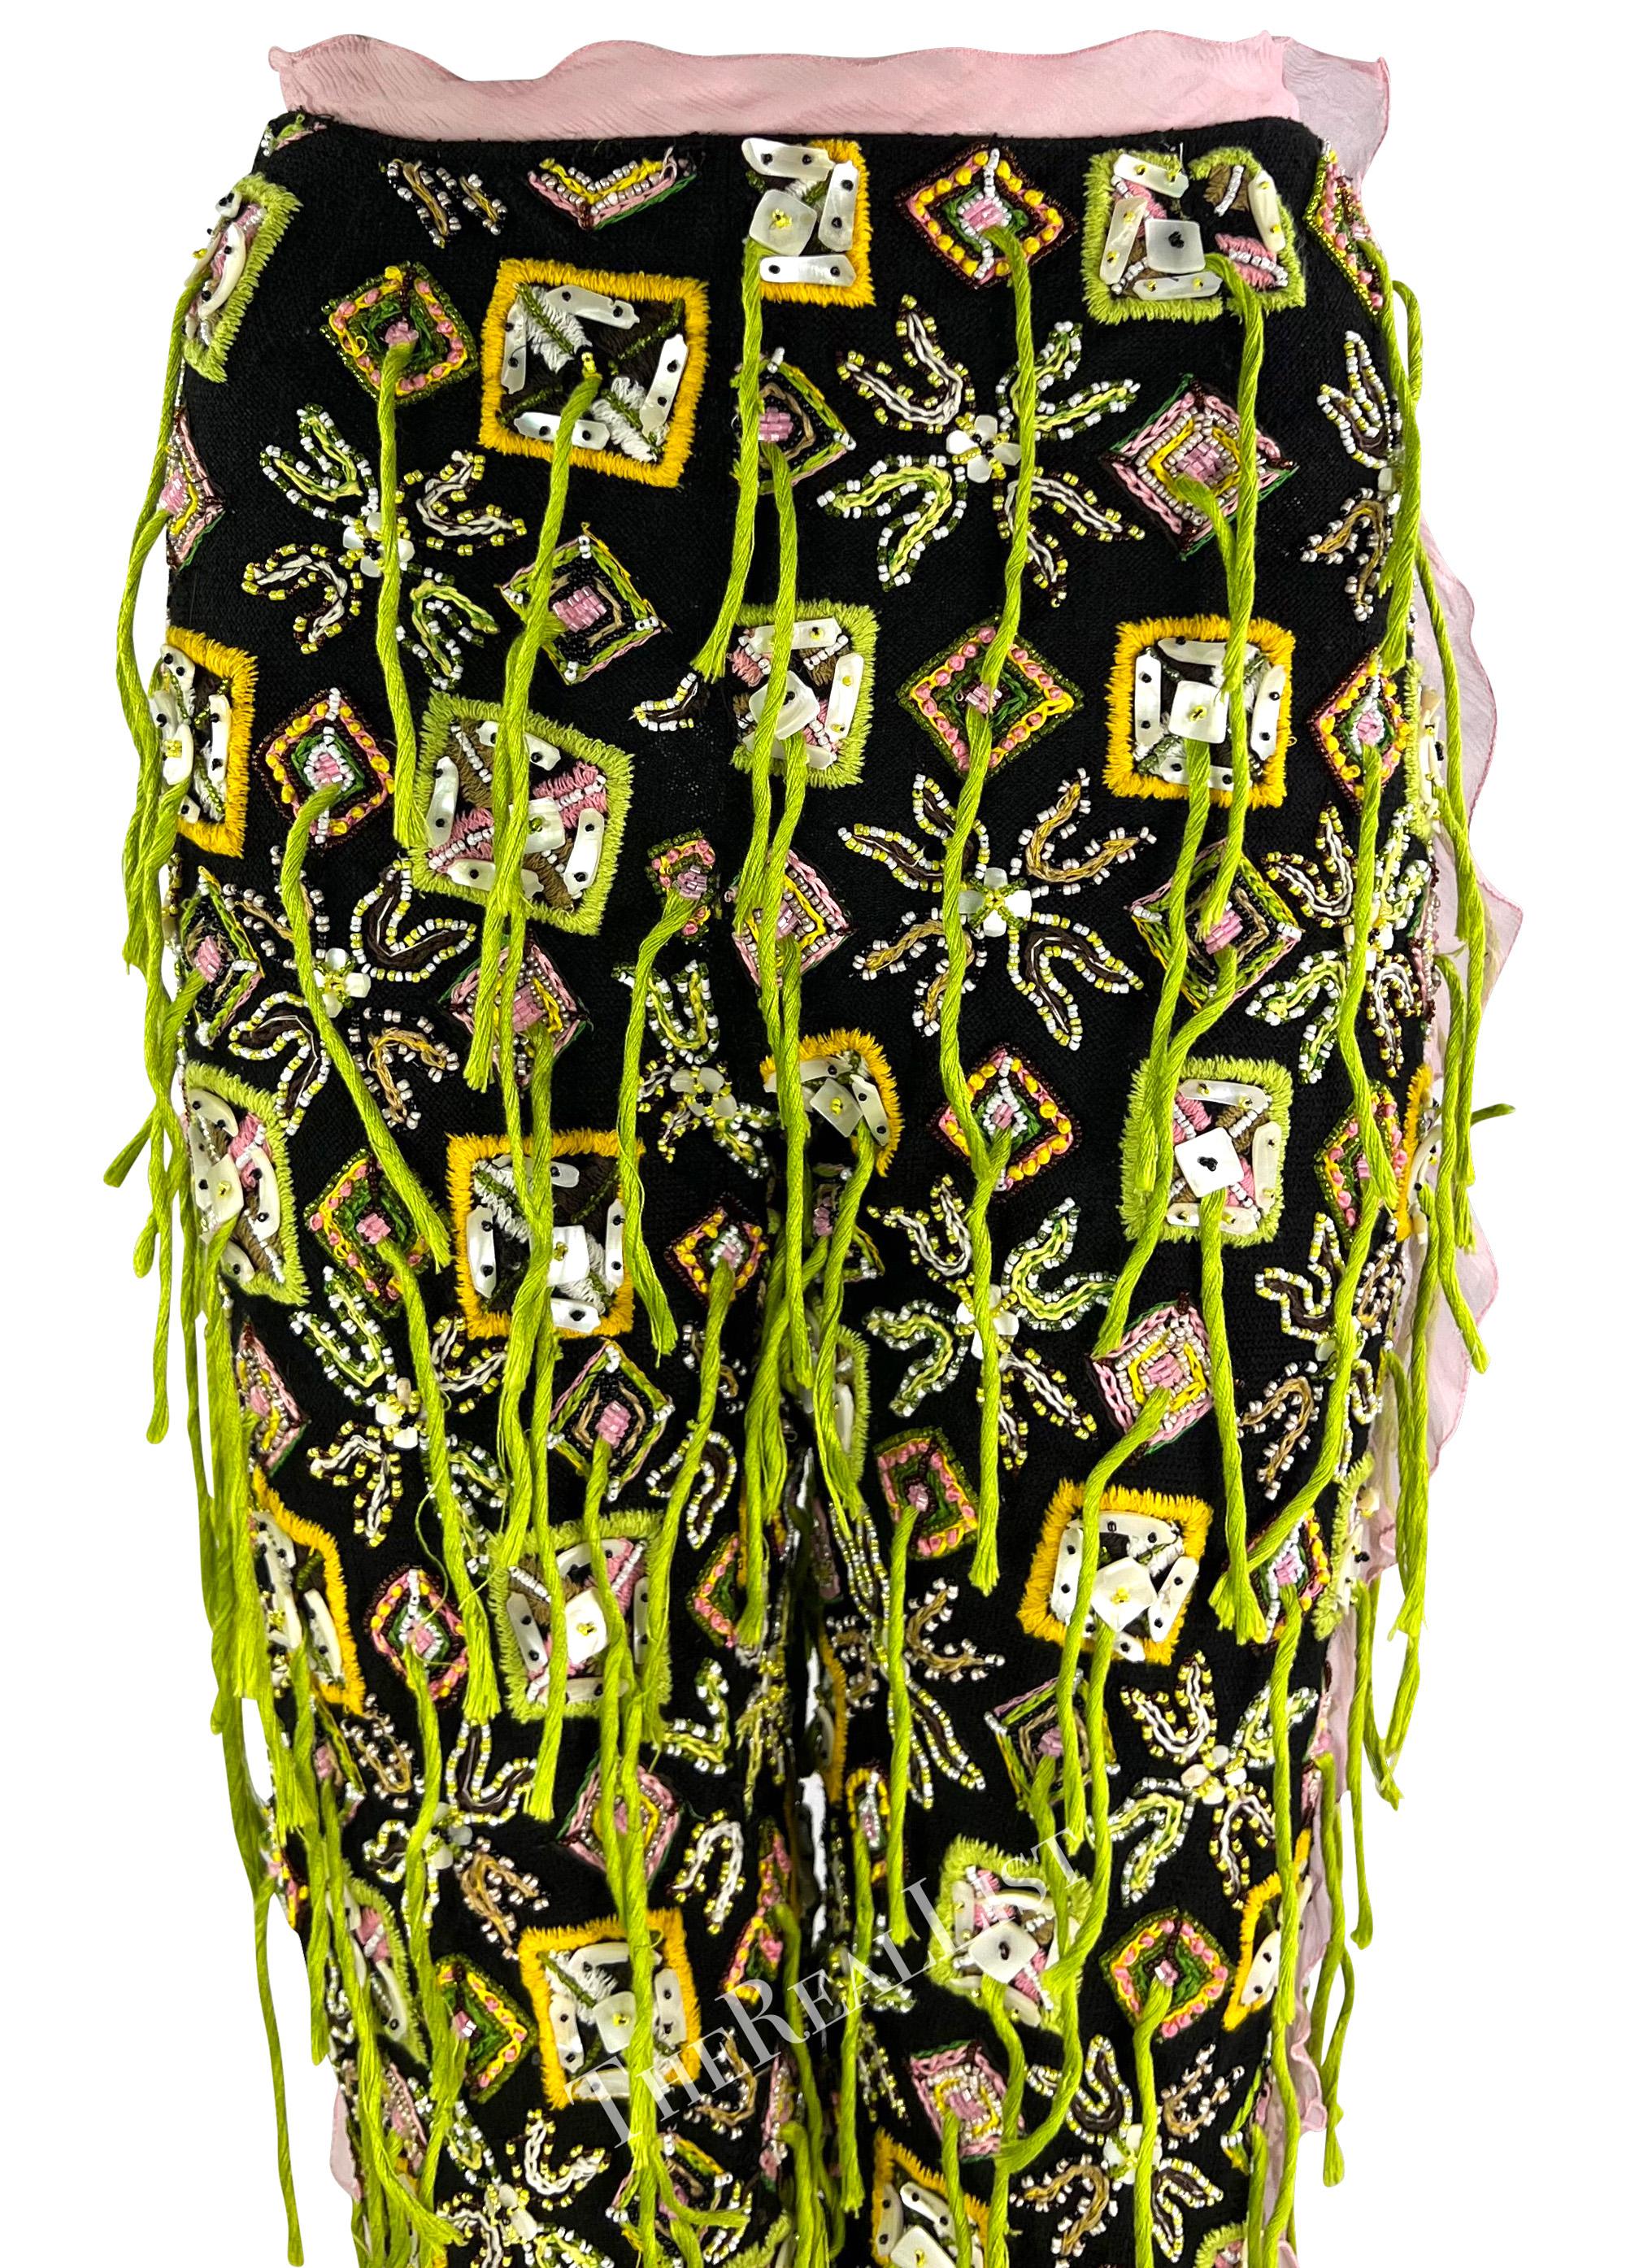 Presenting a pair of incredible black embellished Fendi pants, designed by Karl Lagerfeld. From the Spring/Summer 2000 collection, these black pants are heavily embellished with seed beads, mother-of-pearl, and strands of vibrant green fringe. These